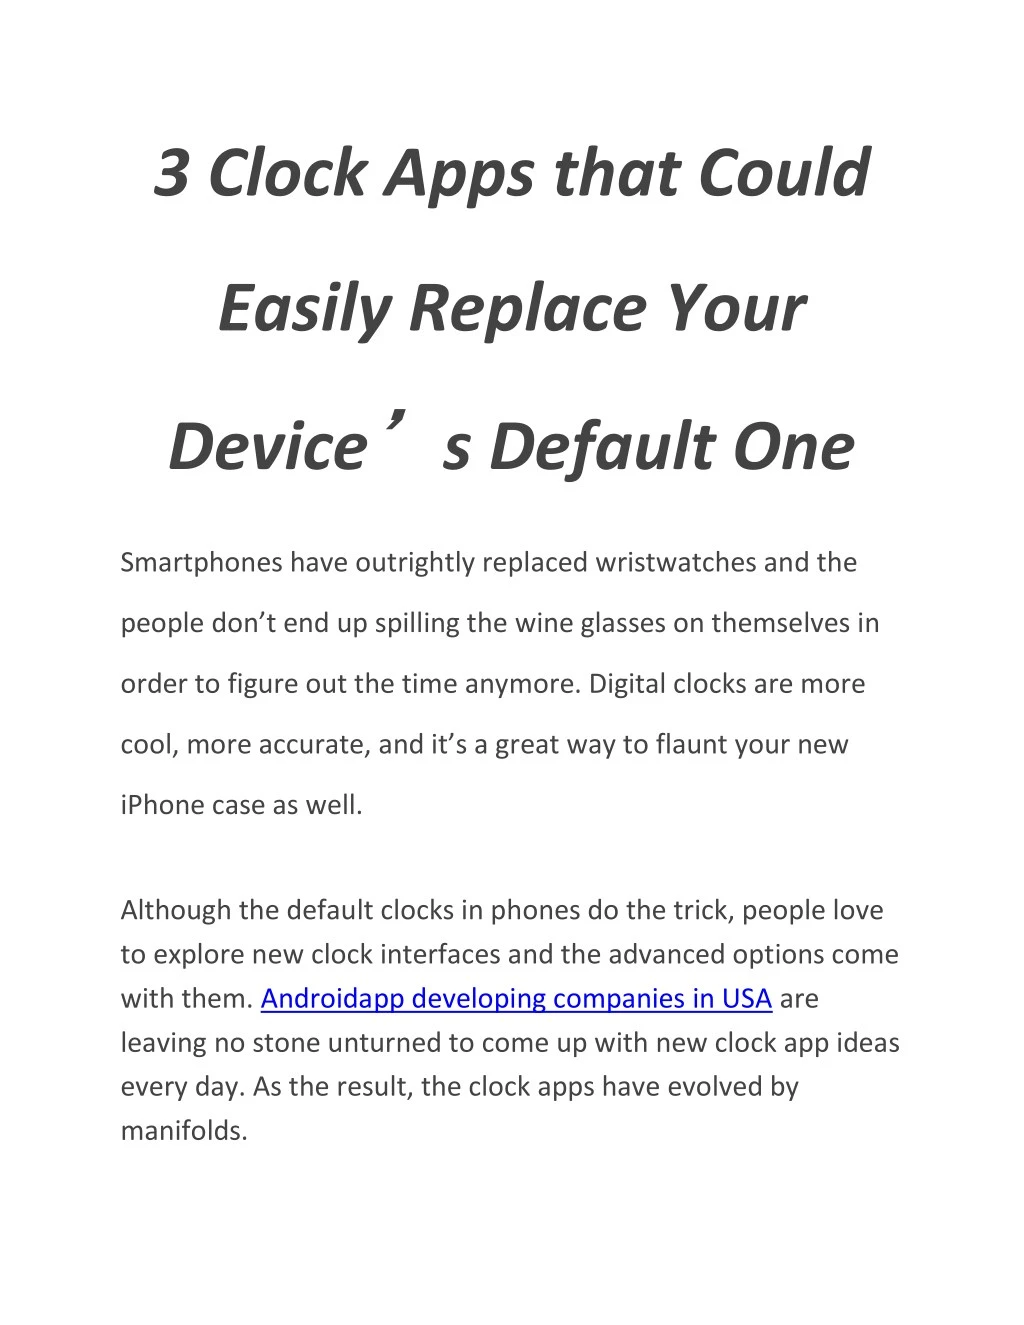 3 clock apps that could